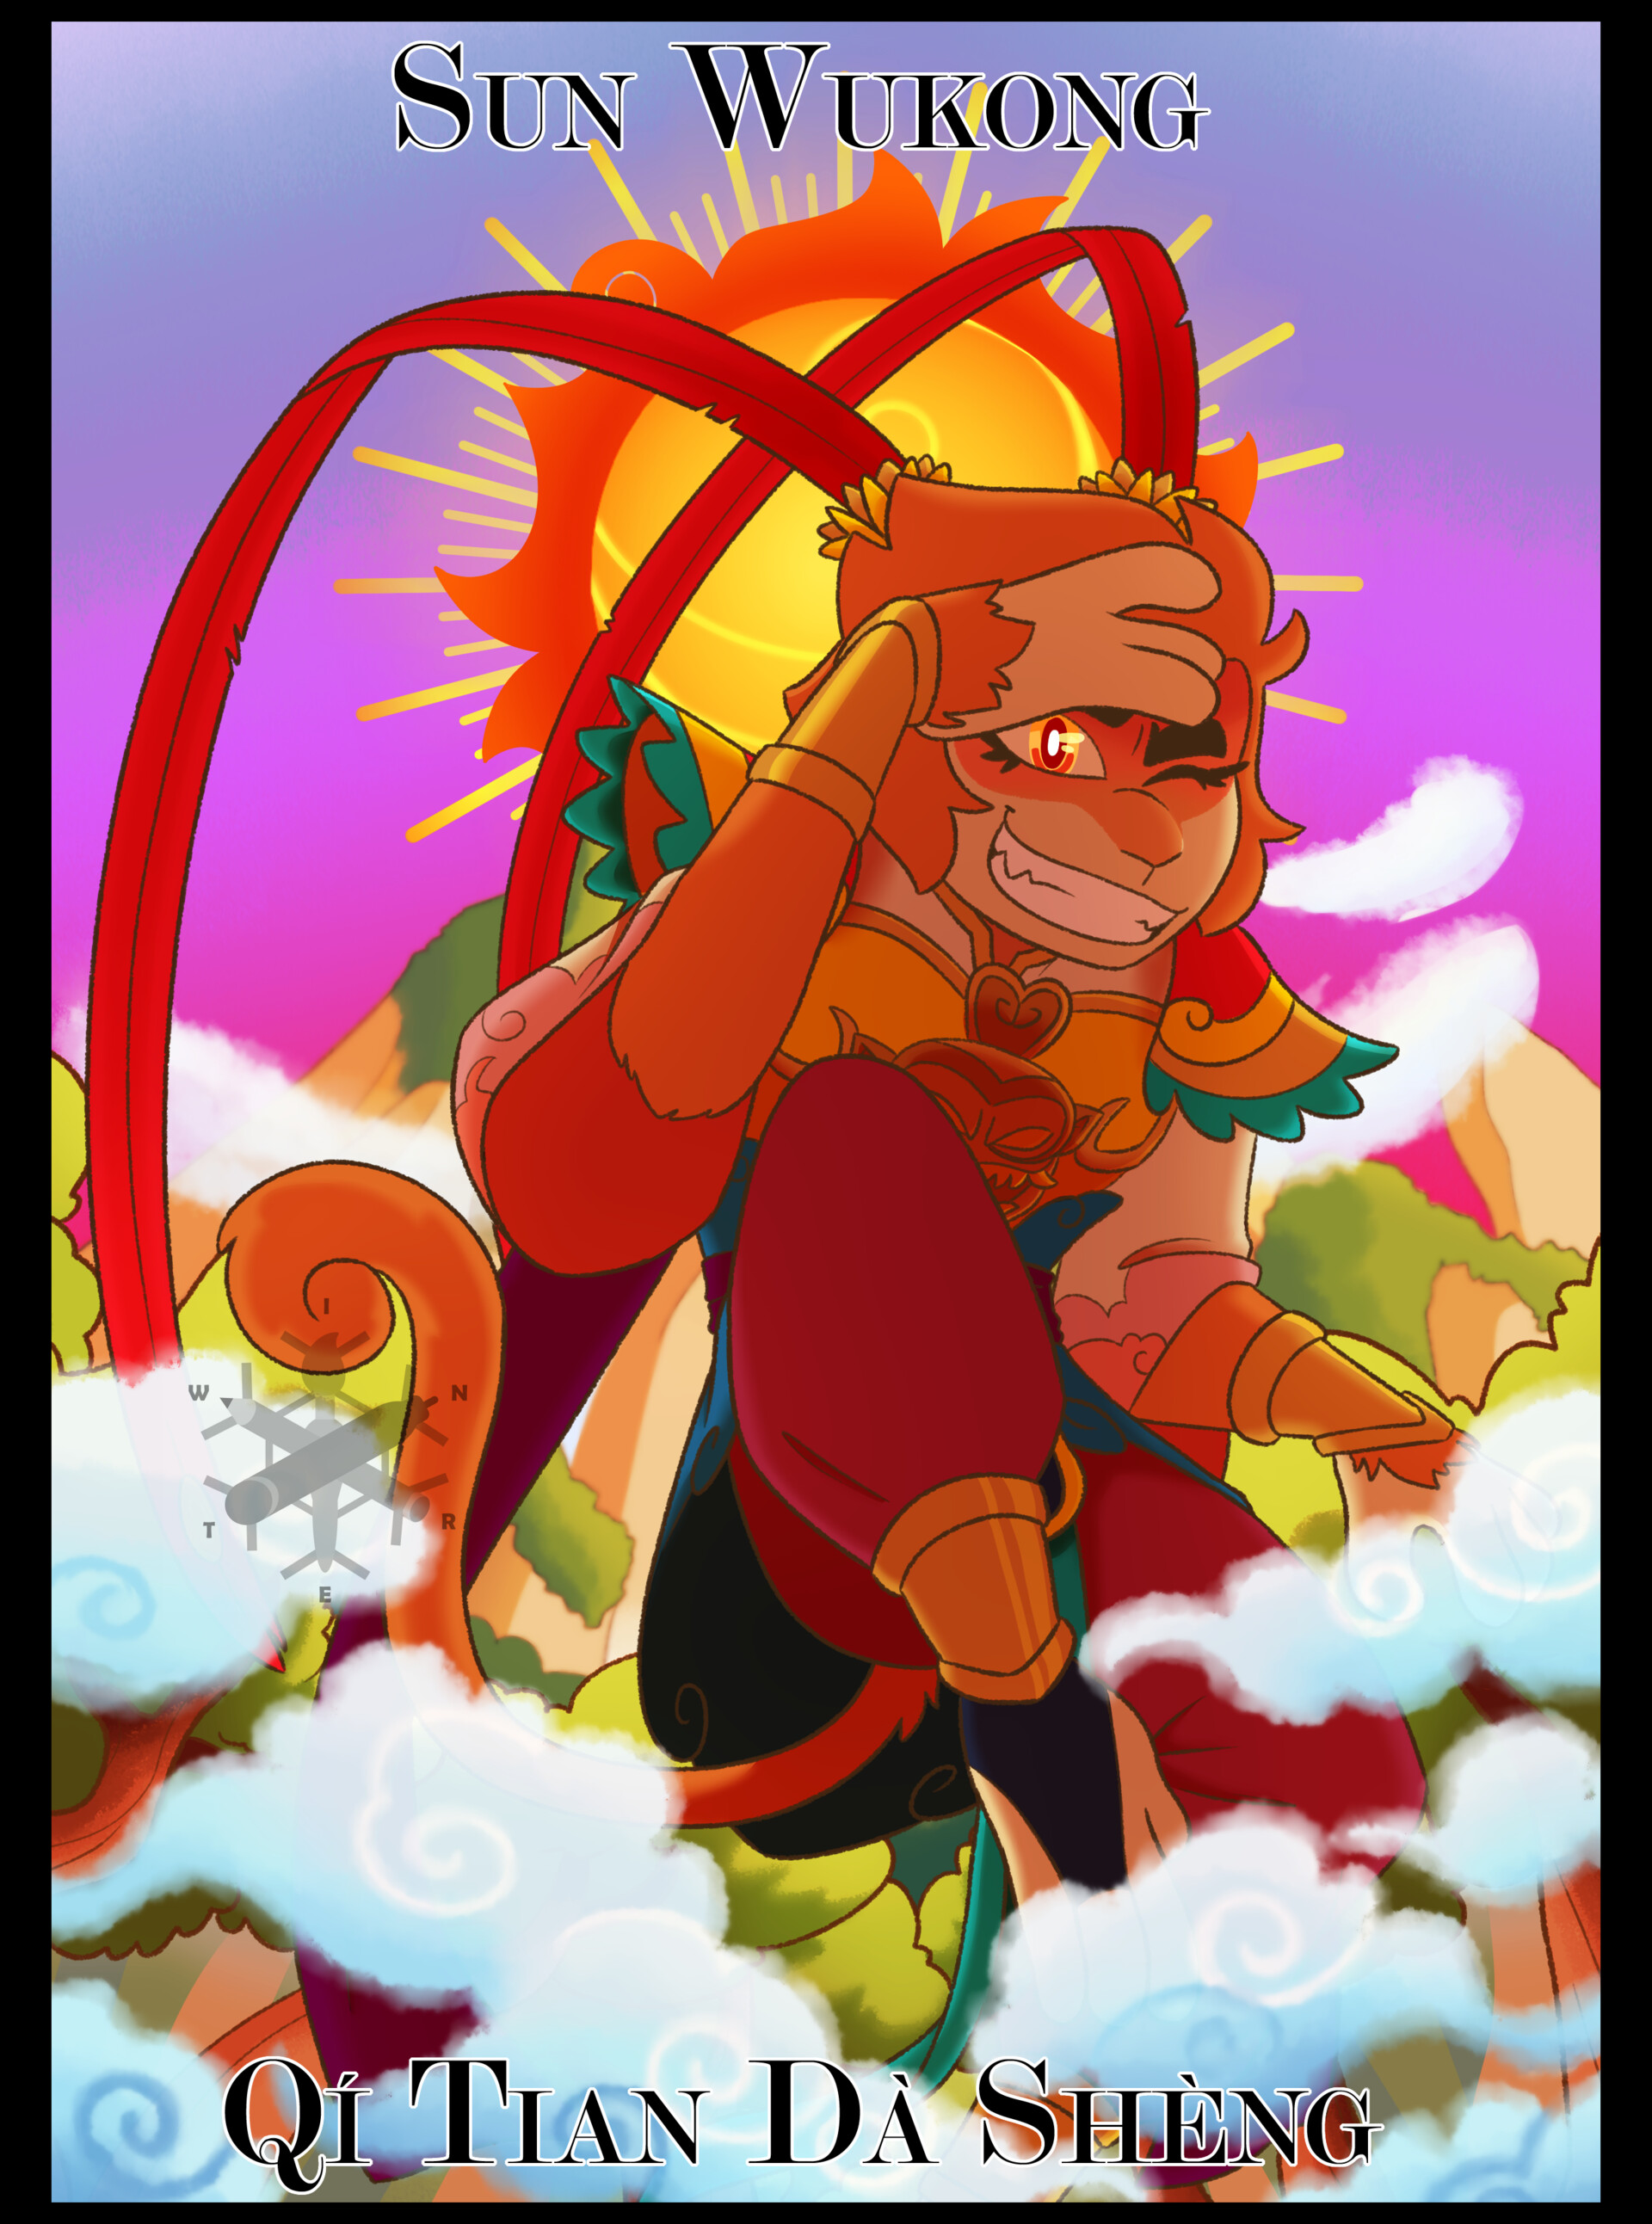 ArtStation - Monkey King and the four generals - tarot card illustration